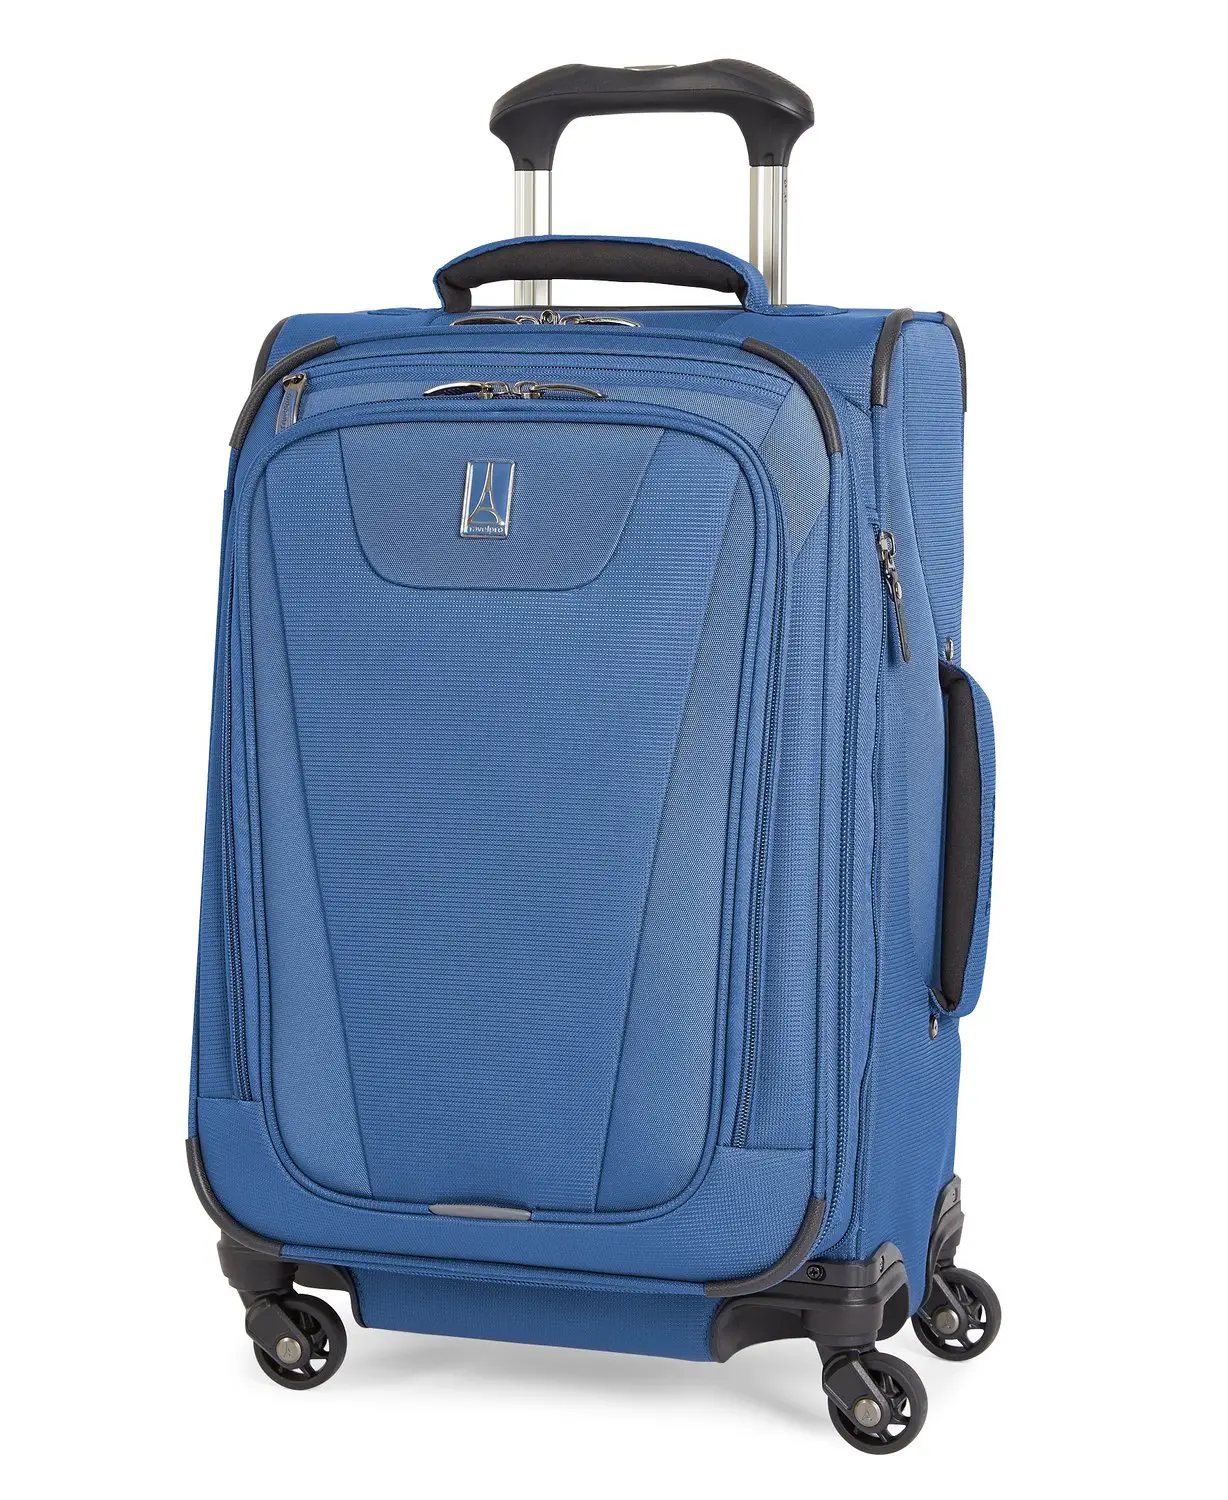 Travelpro Maxlite 21″ – An In-Depth Look At This Ultra Lightweight Softside Luggage